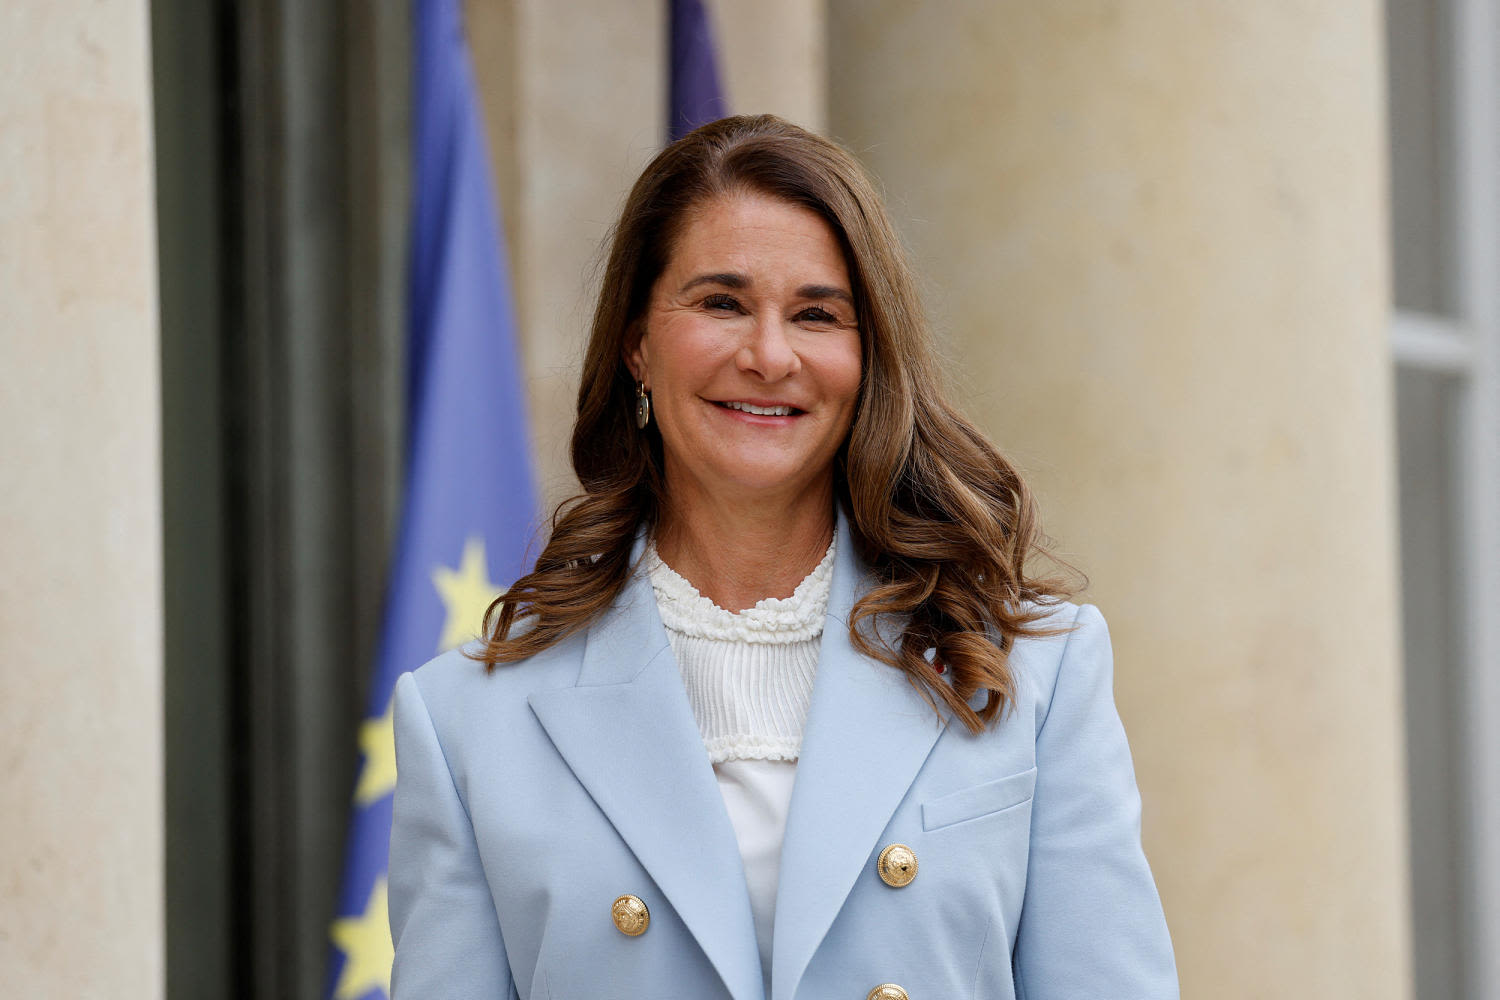 Melinda French Gates says she's donating $1B to women's rights